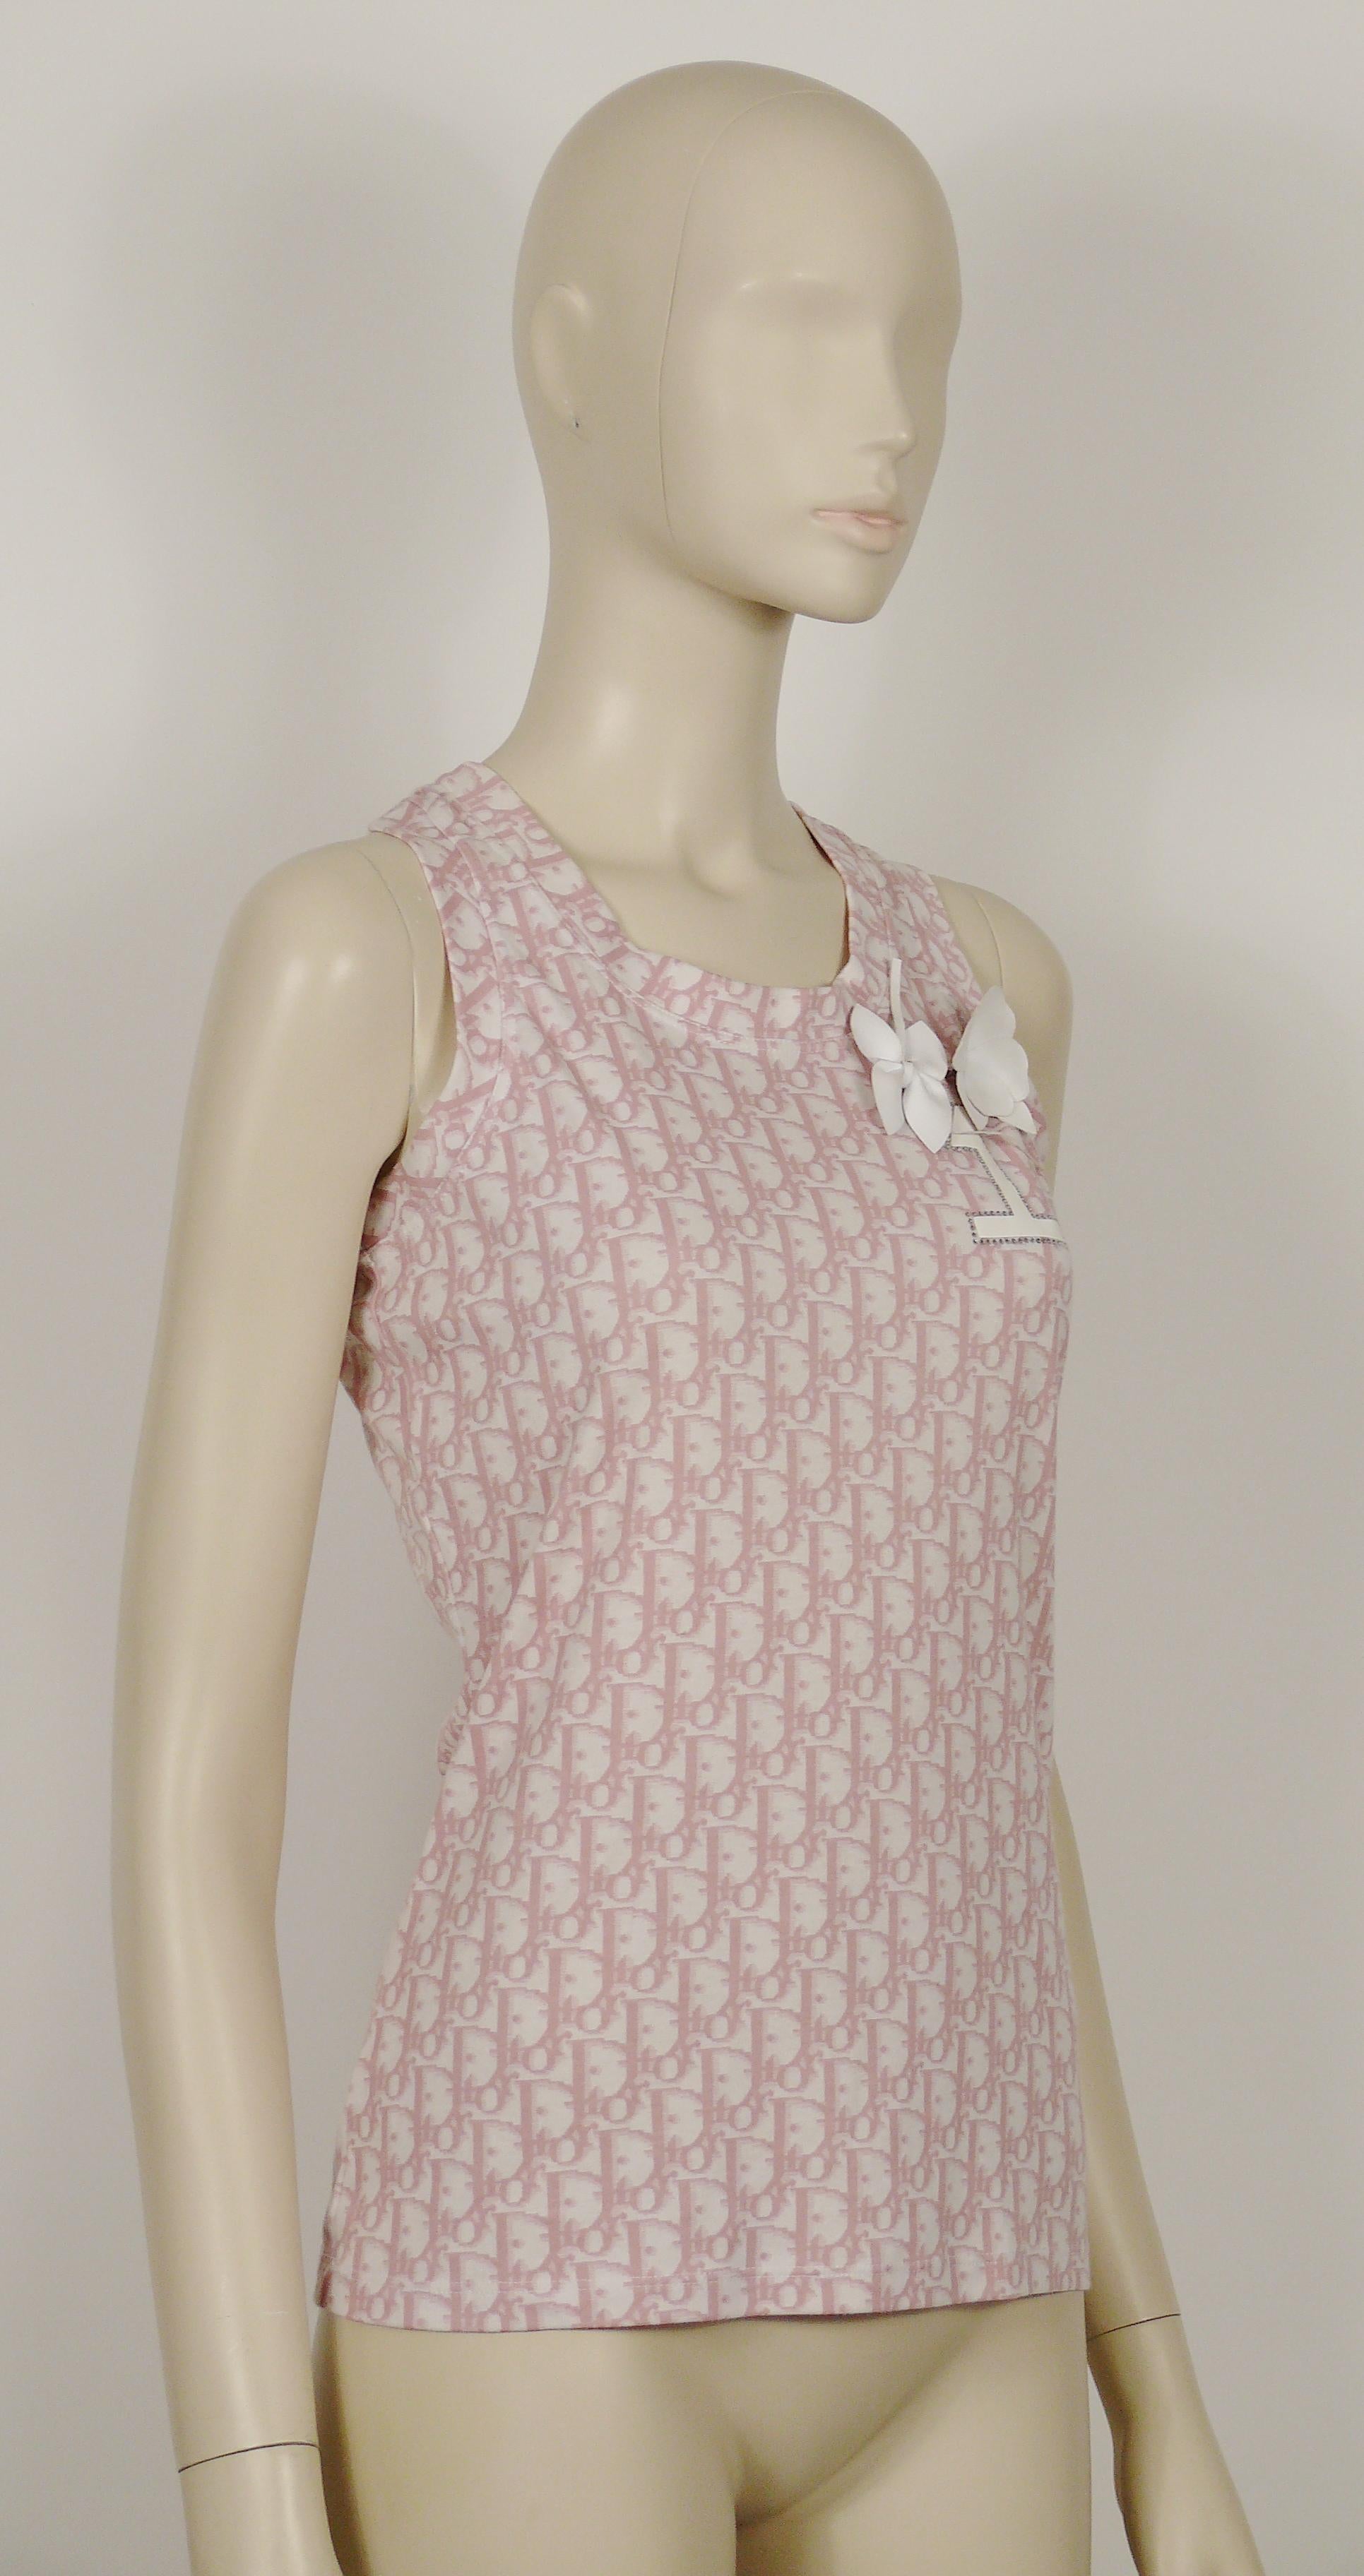 CHRISTIAN DIOR by JOHN GALLIANO vintage tank top featuring an all over trotter monogram pattern in girly pink on a white background, 2 white viny flower brooches and a crystal embellished Nº1 patch on the chest.

Label reads CHRISTIAN DIOR BOUTIQUE